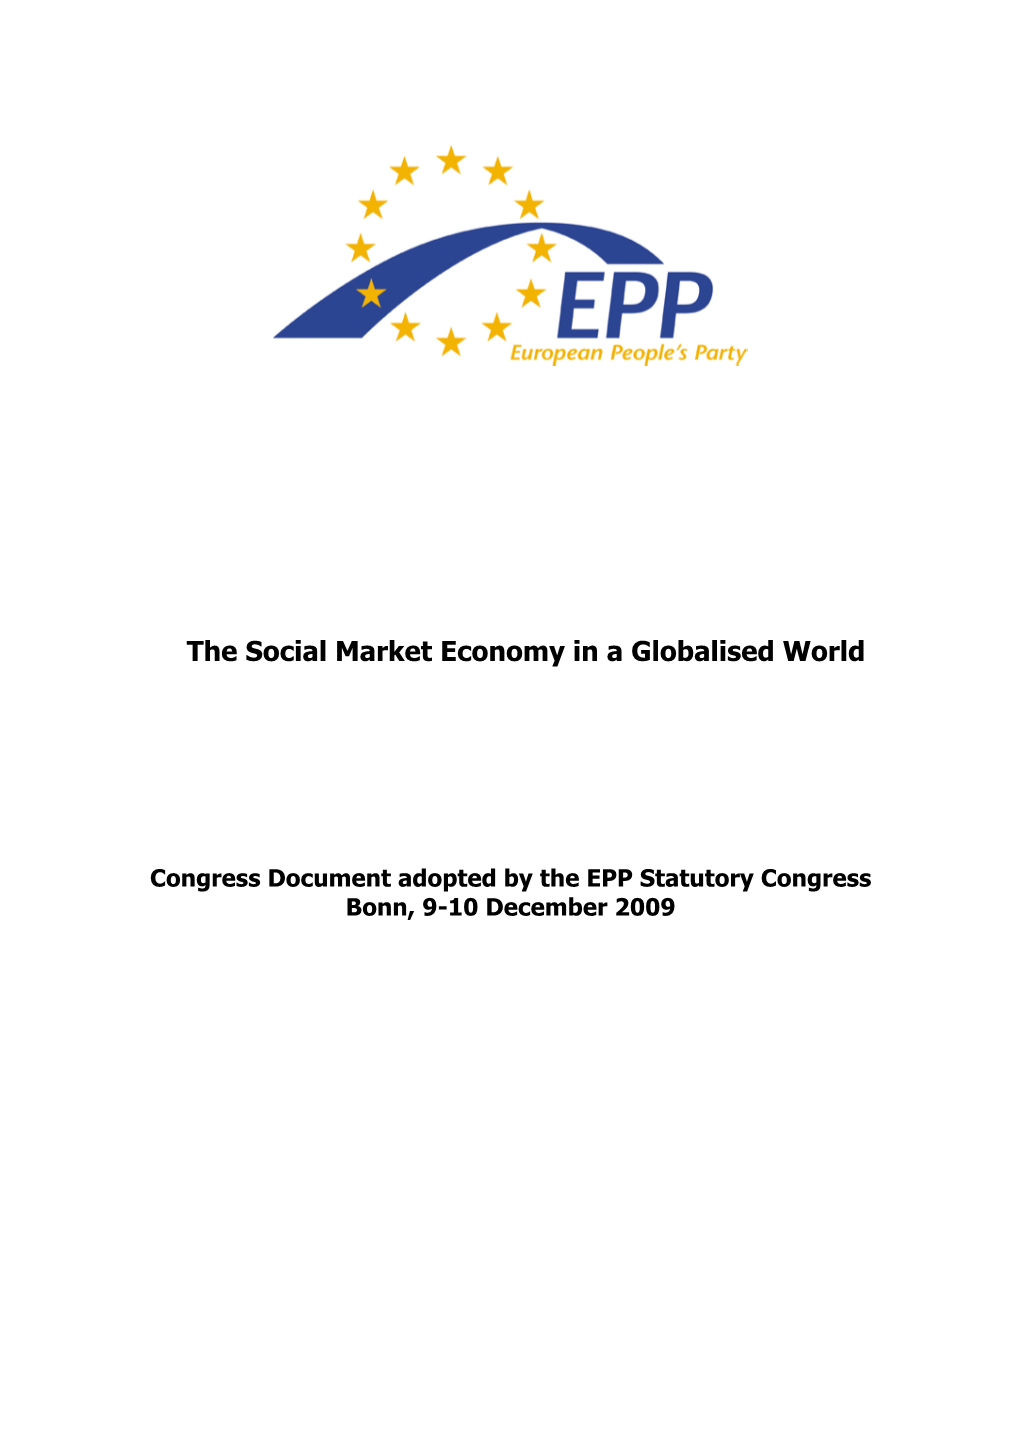 The Social Market Economy in a Globalised World